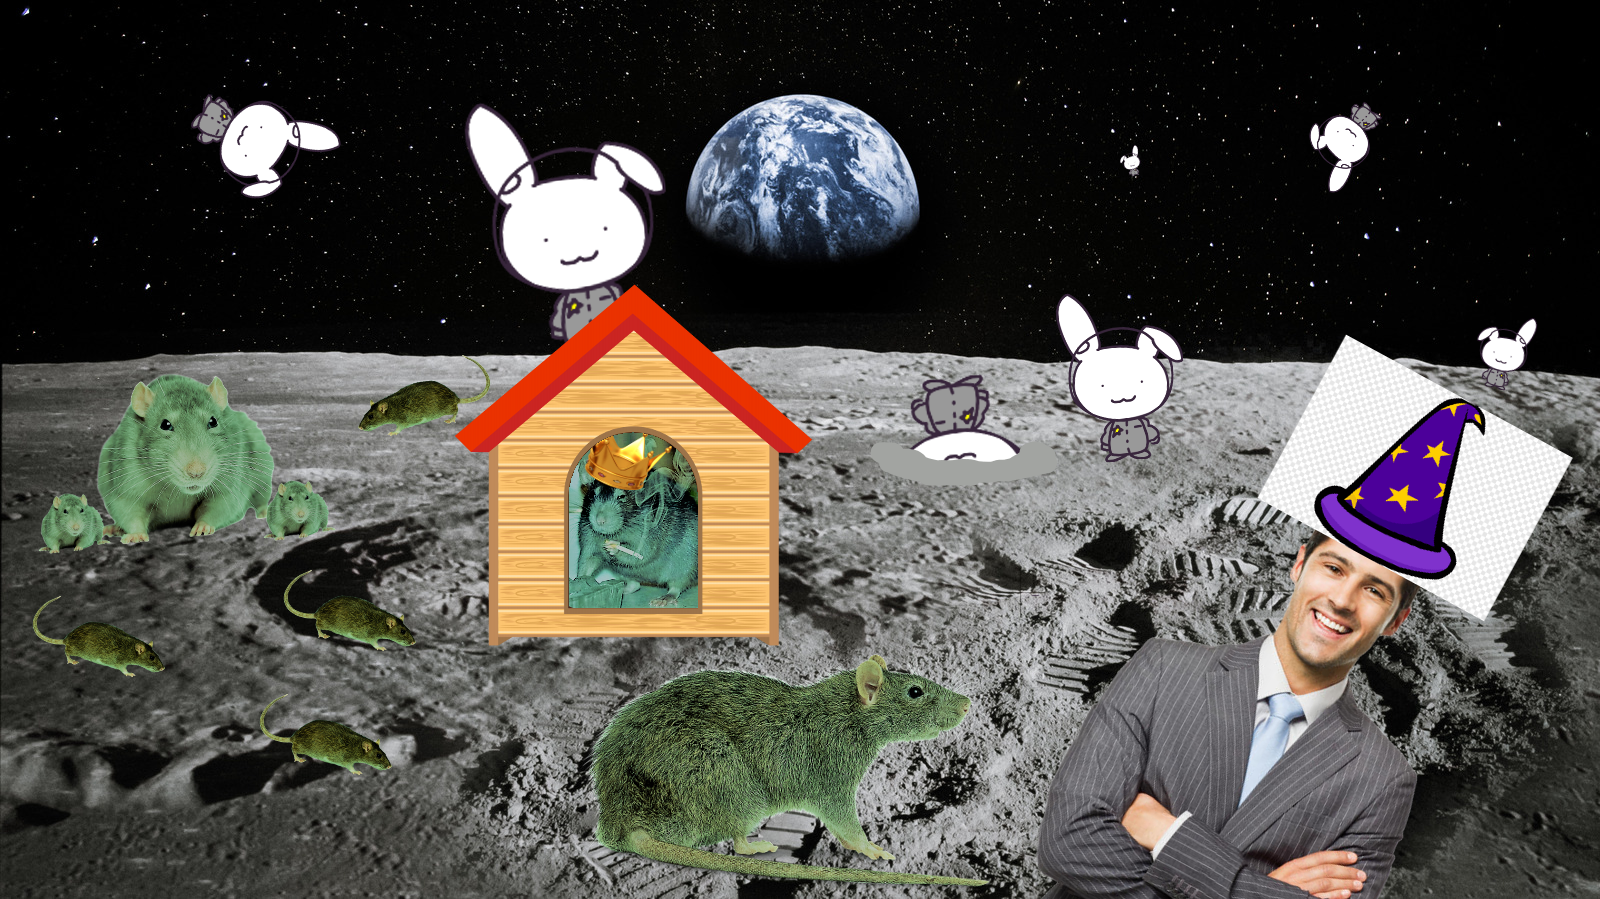 You at the moon with alien rats and moon rabbits.